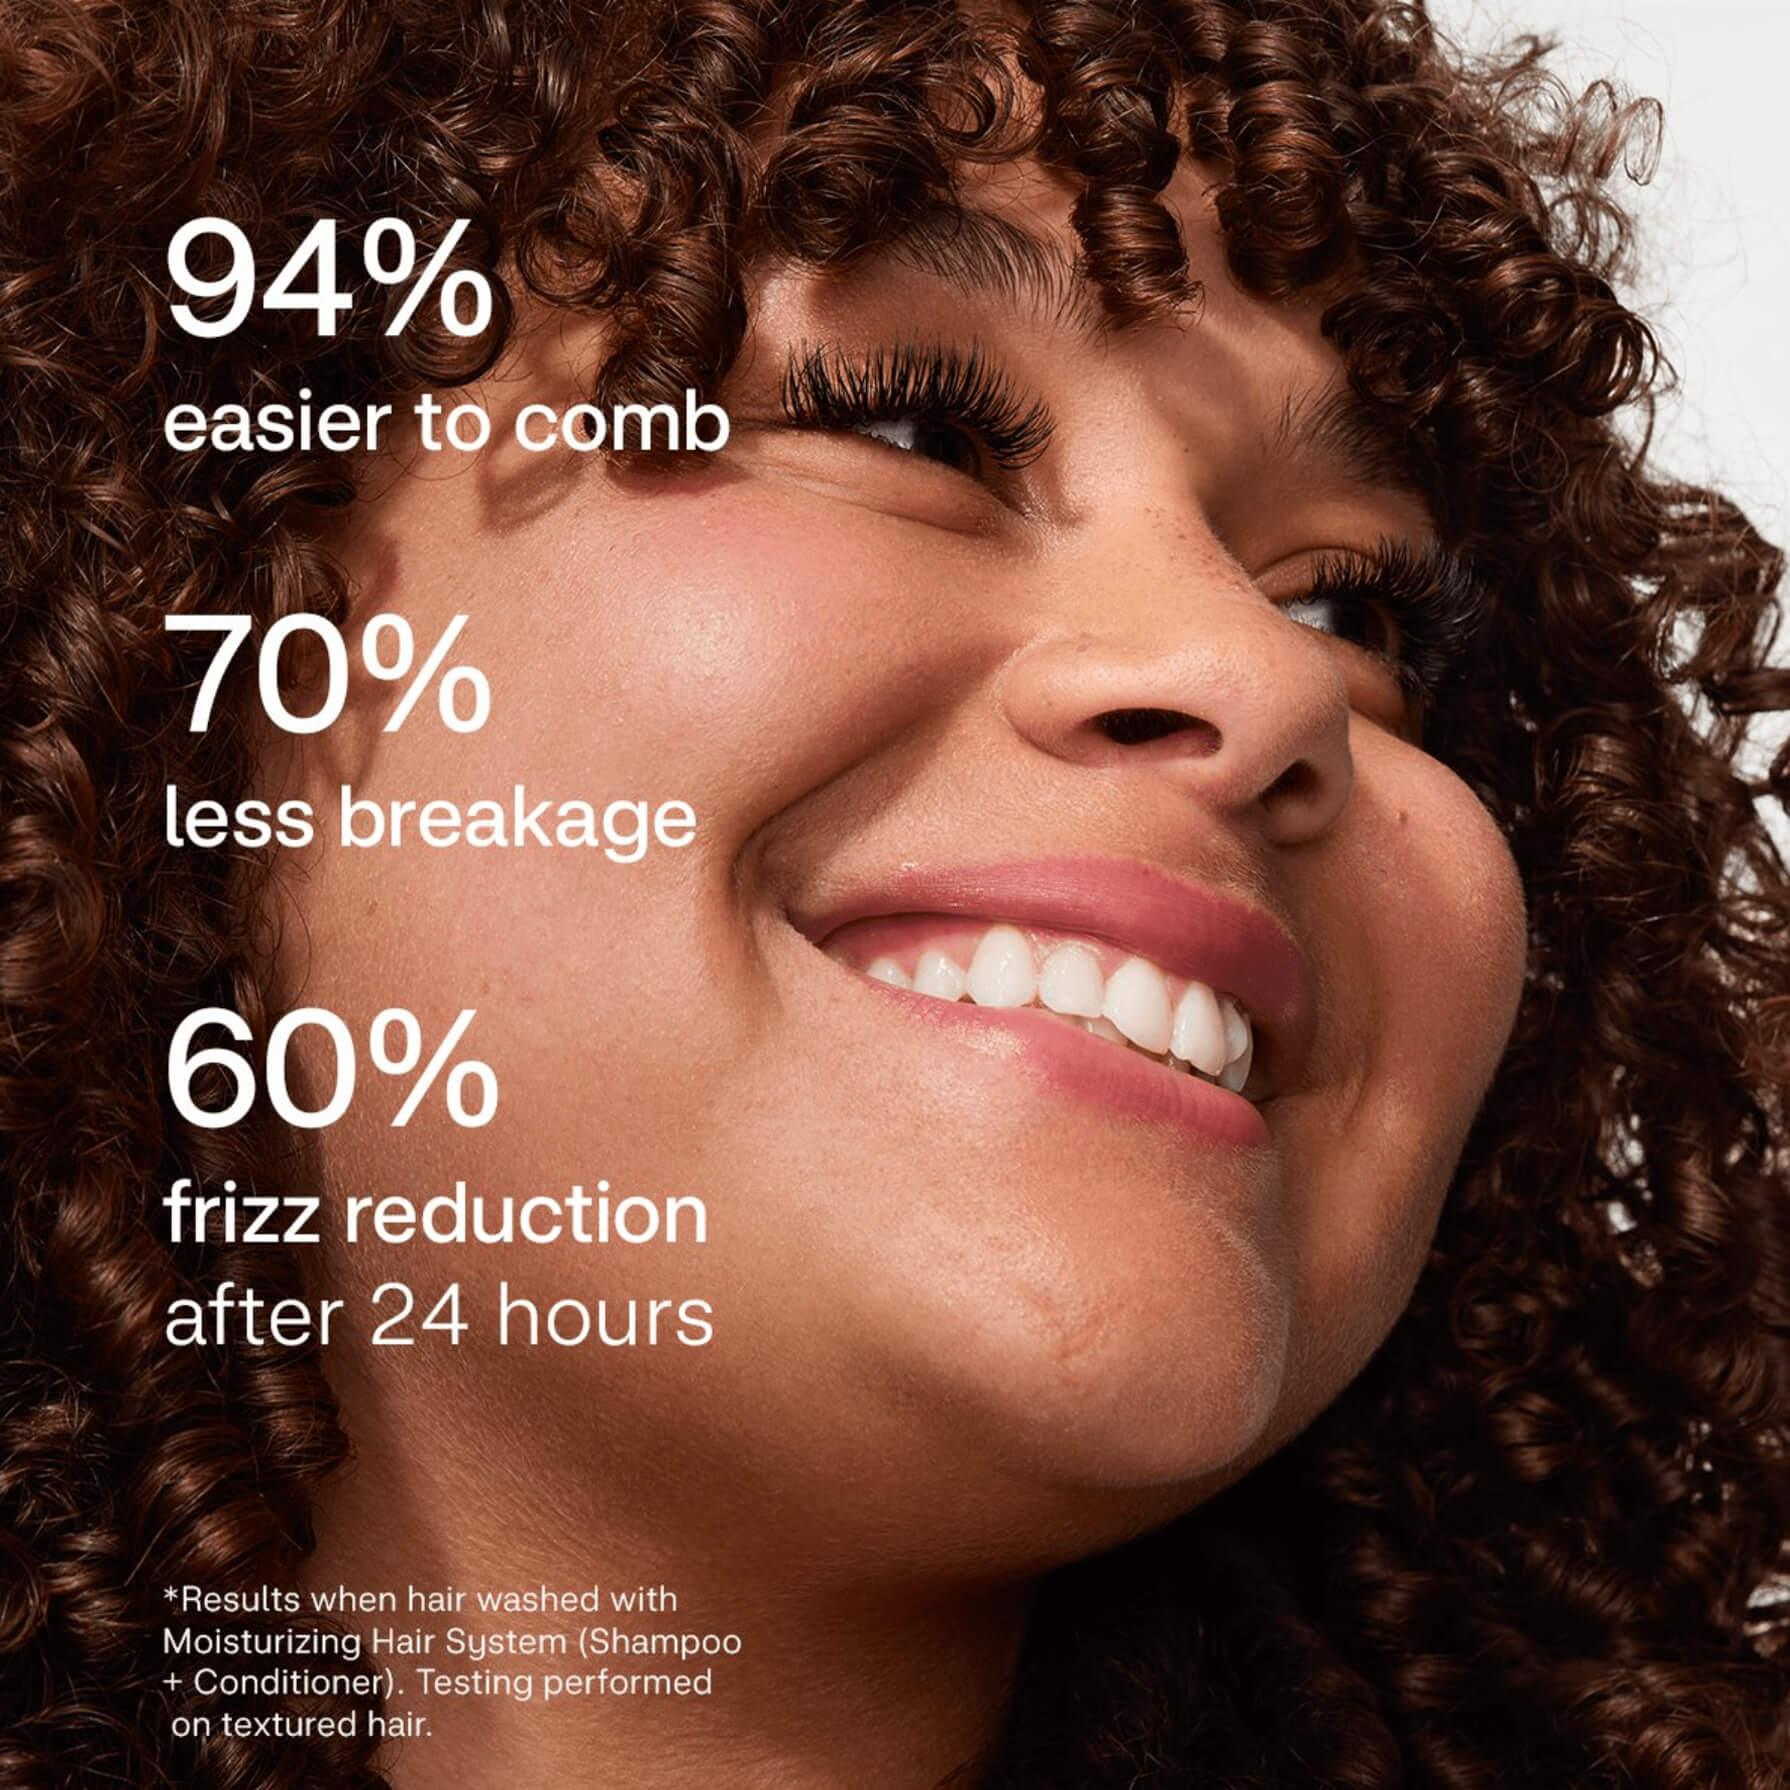 94% easier to comp, 60% less breakage and 60% frizz reduction after 24 hours.